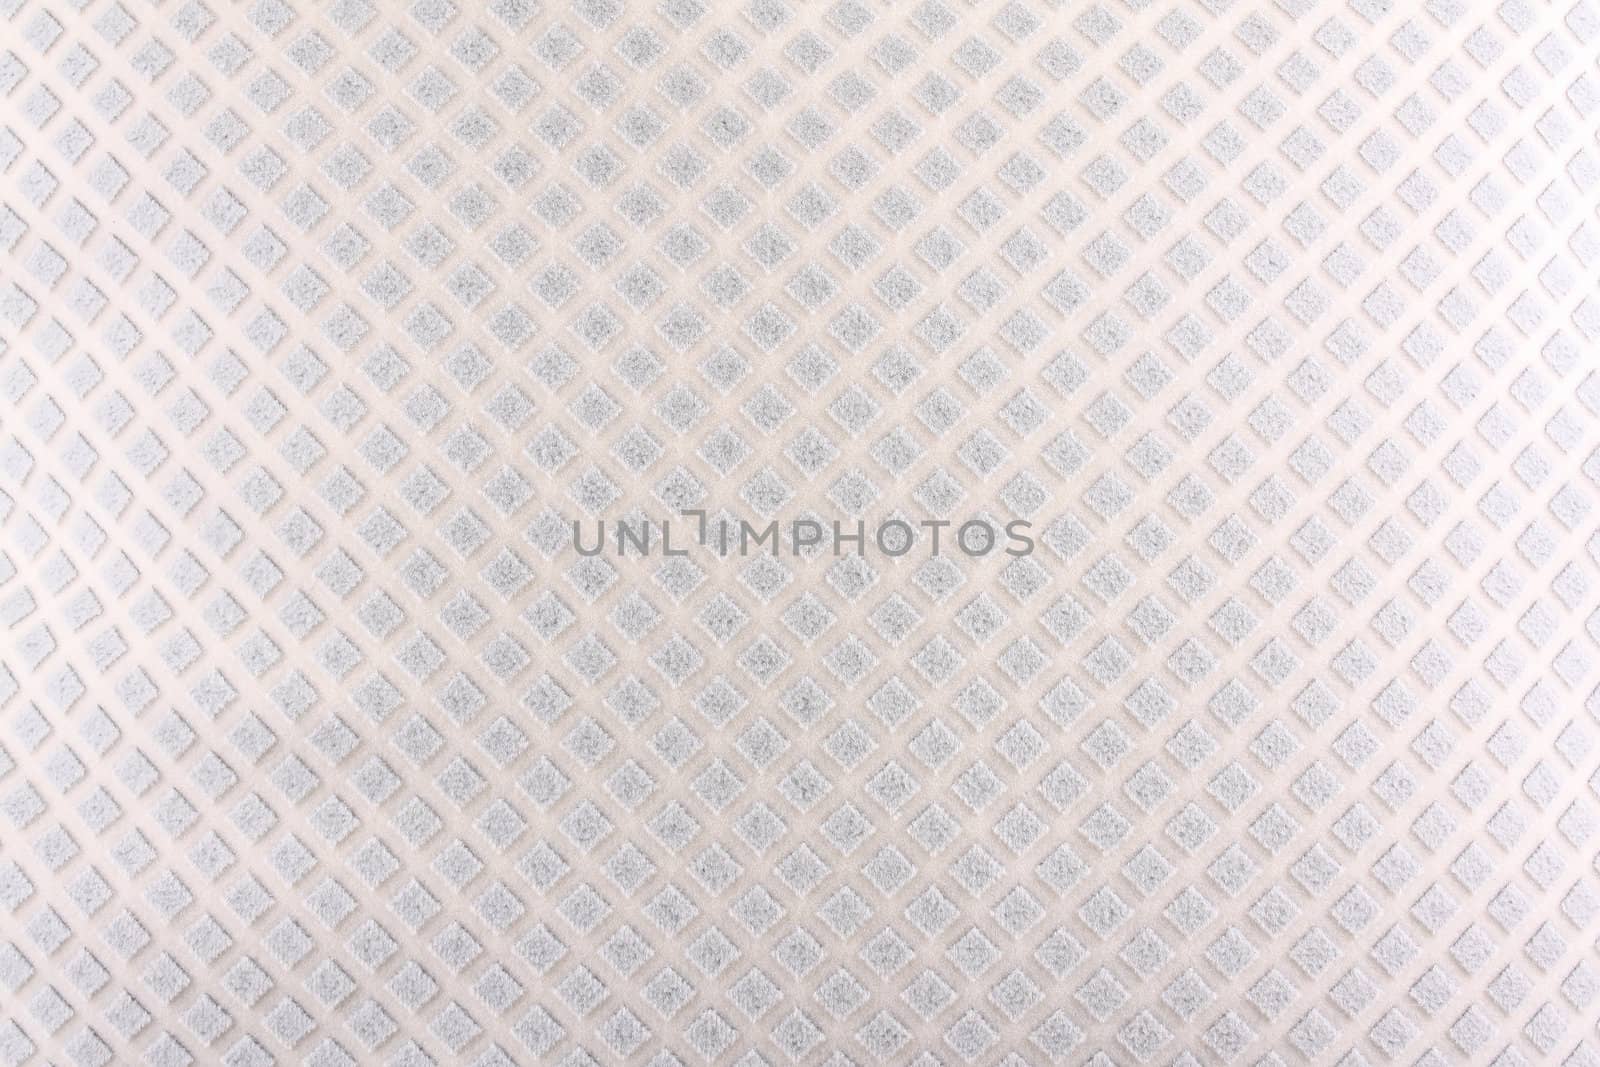 A background of a white fabric with an abstract design of diamond shapes on it.